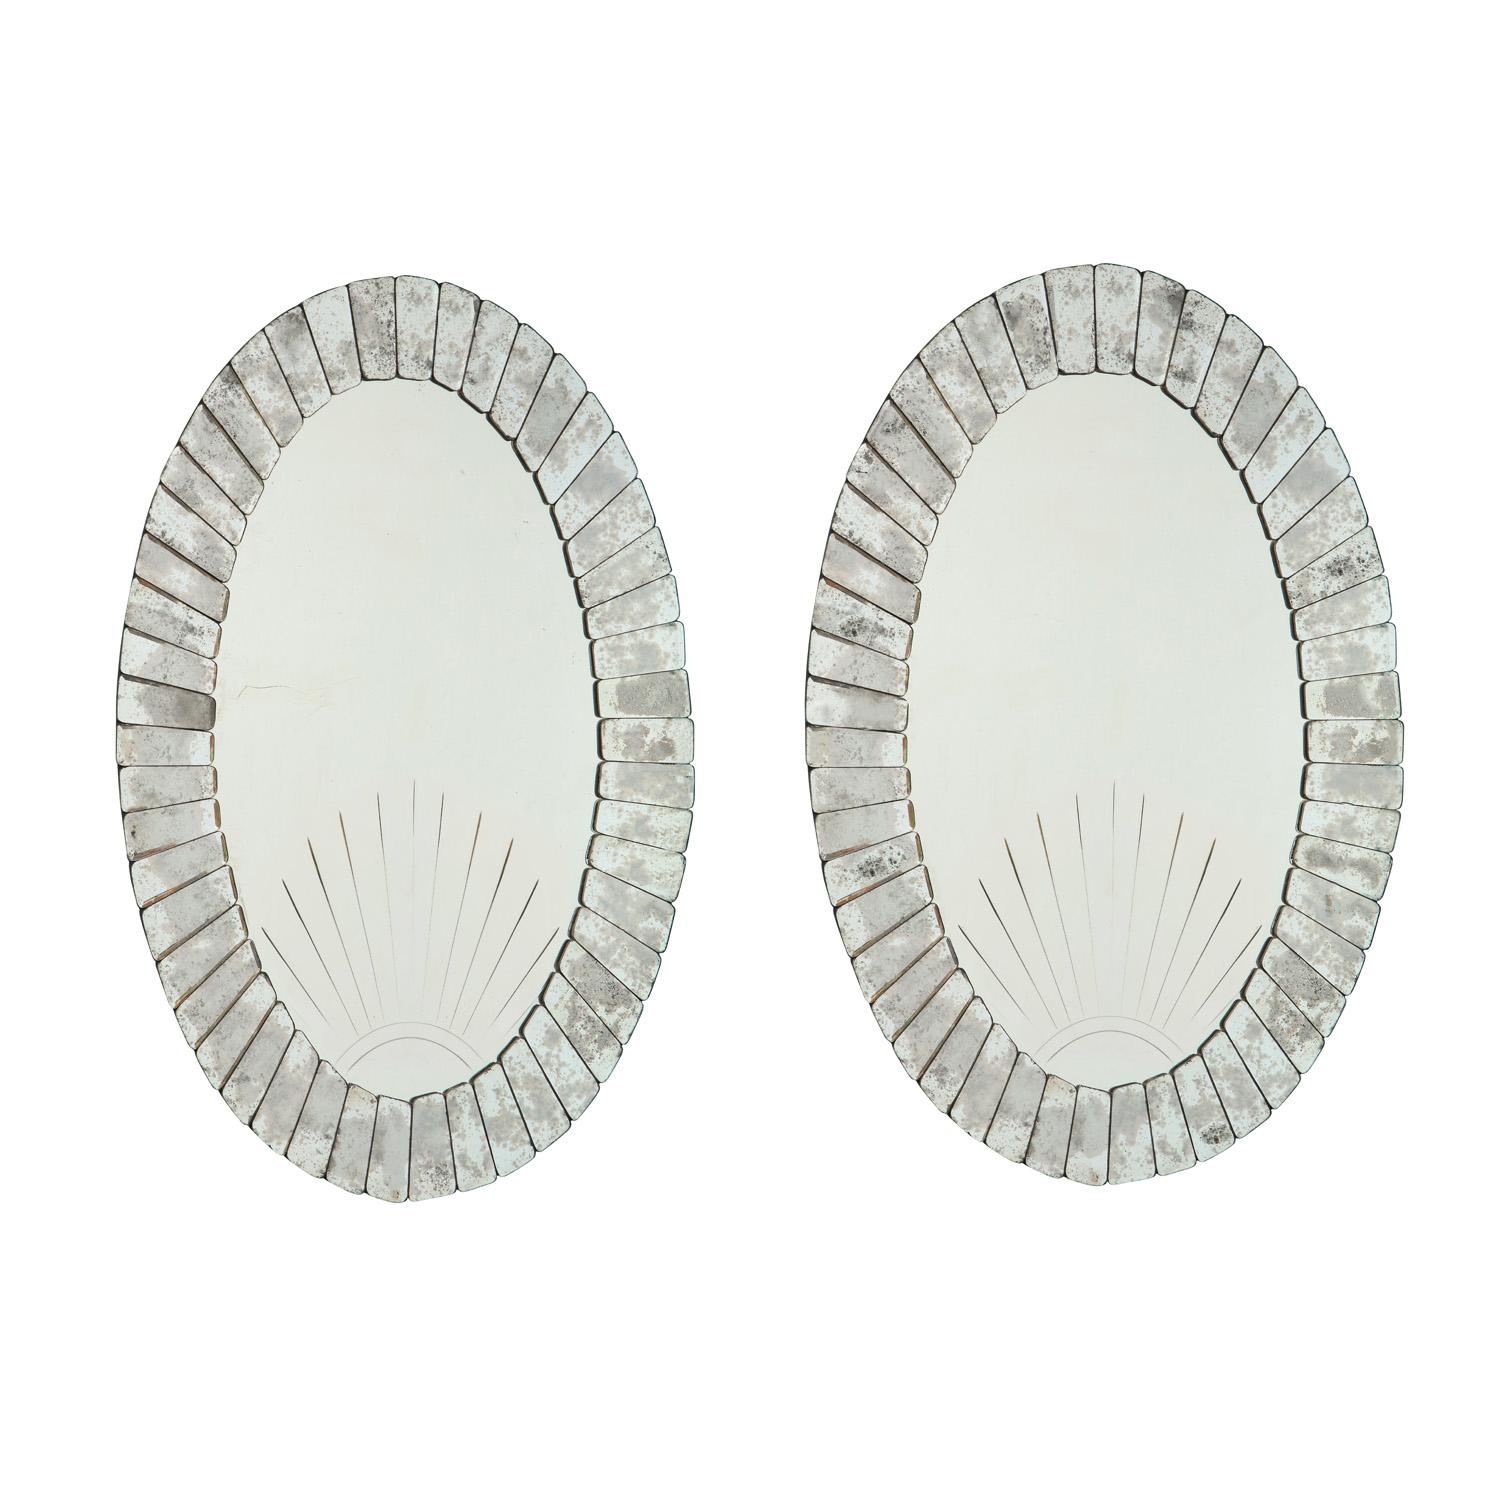 Pair of superb large artisan etched Art Deco sunset mirrors with antiqued mirror starburst pattern around center mirror, Venetian 1930's. The Venetians did many tributes to the spectacular sunsets over the lagoons. This is a beautifully crafted pair